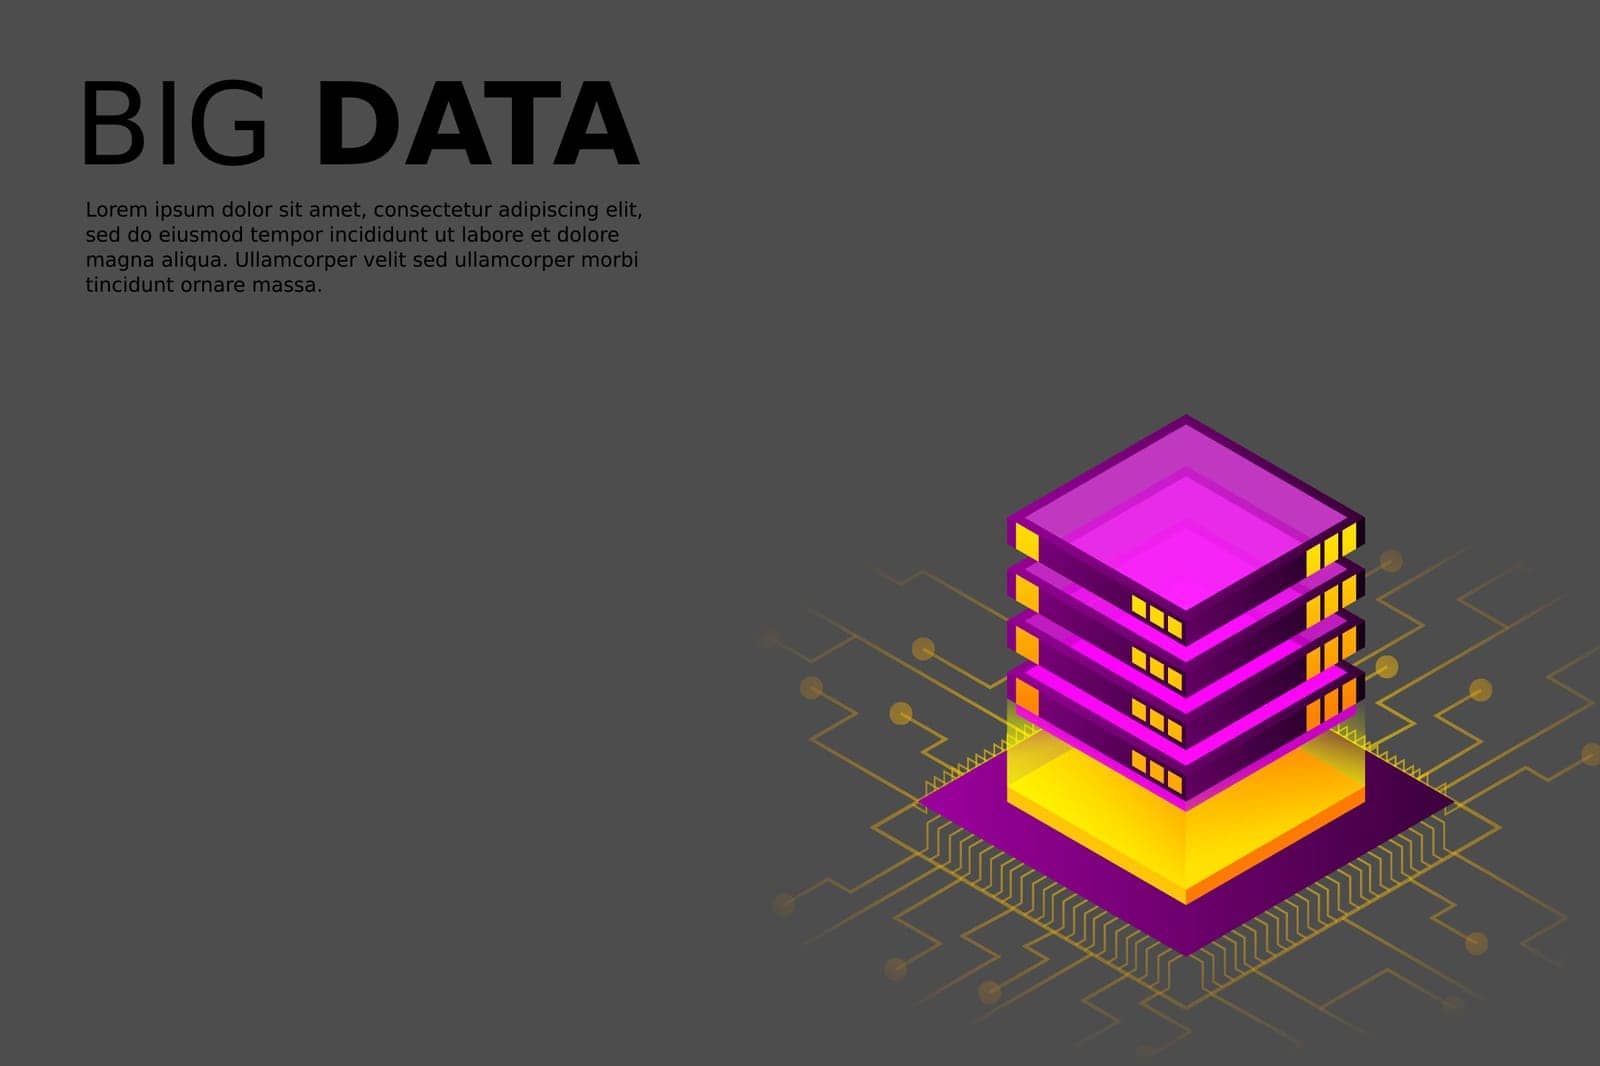 Concept of big data processing energy station of future server room rack data center by Aozora